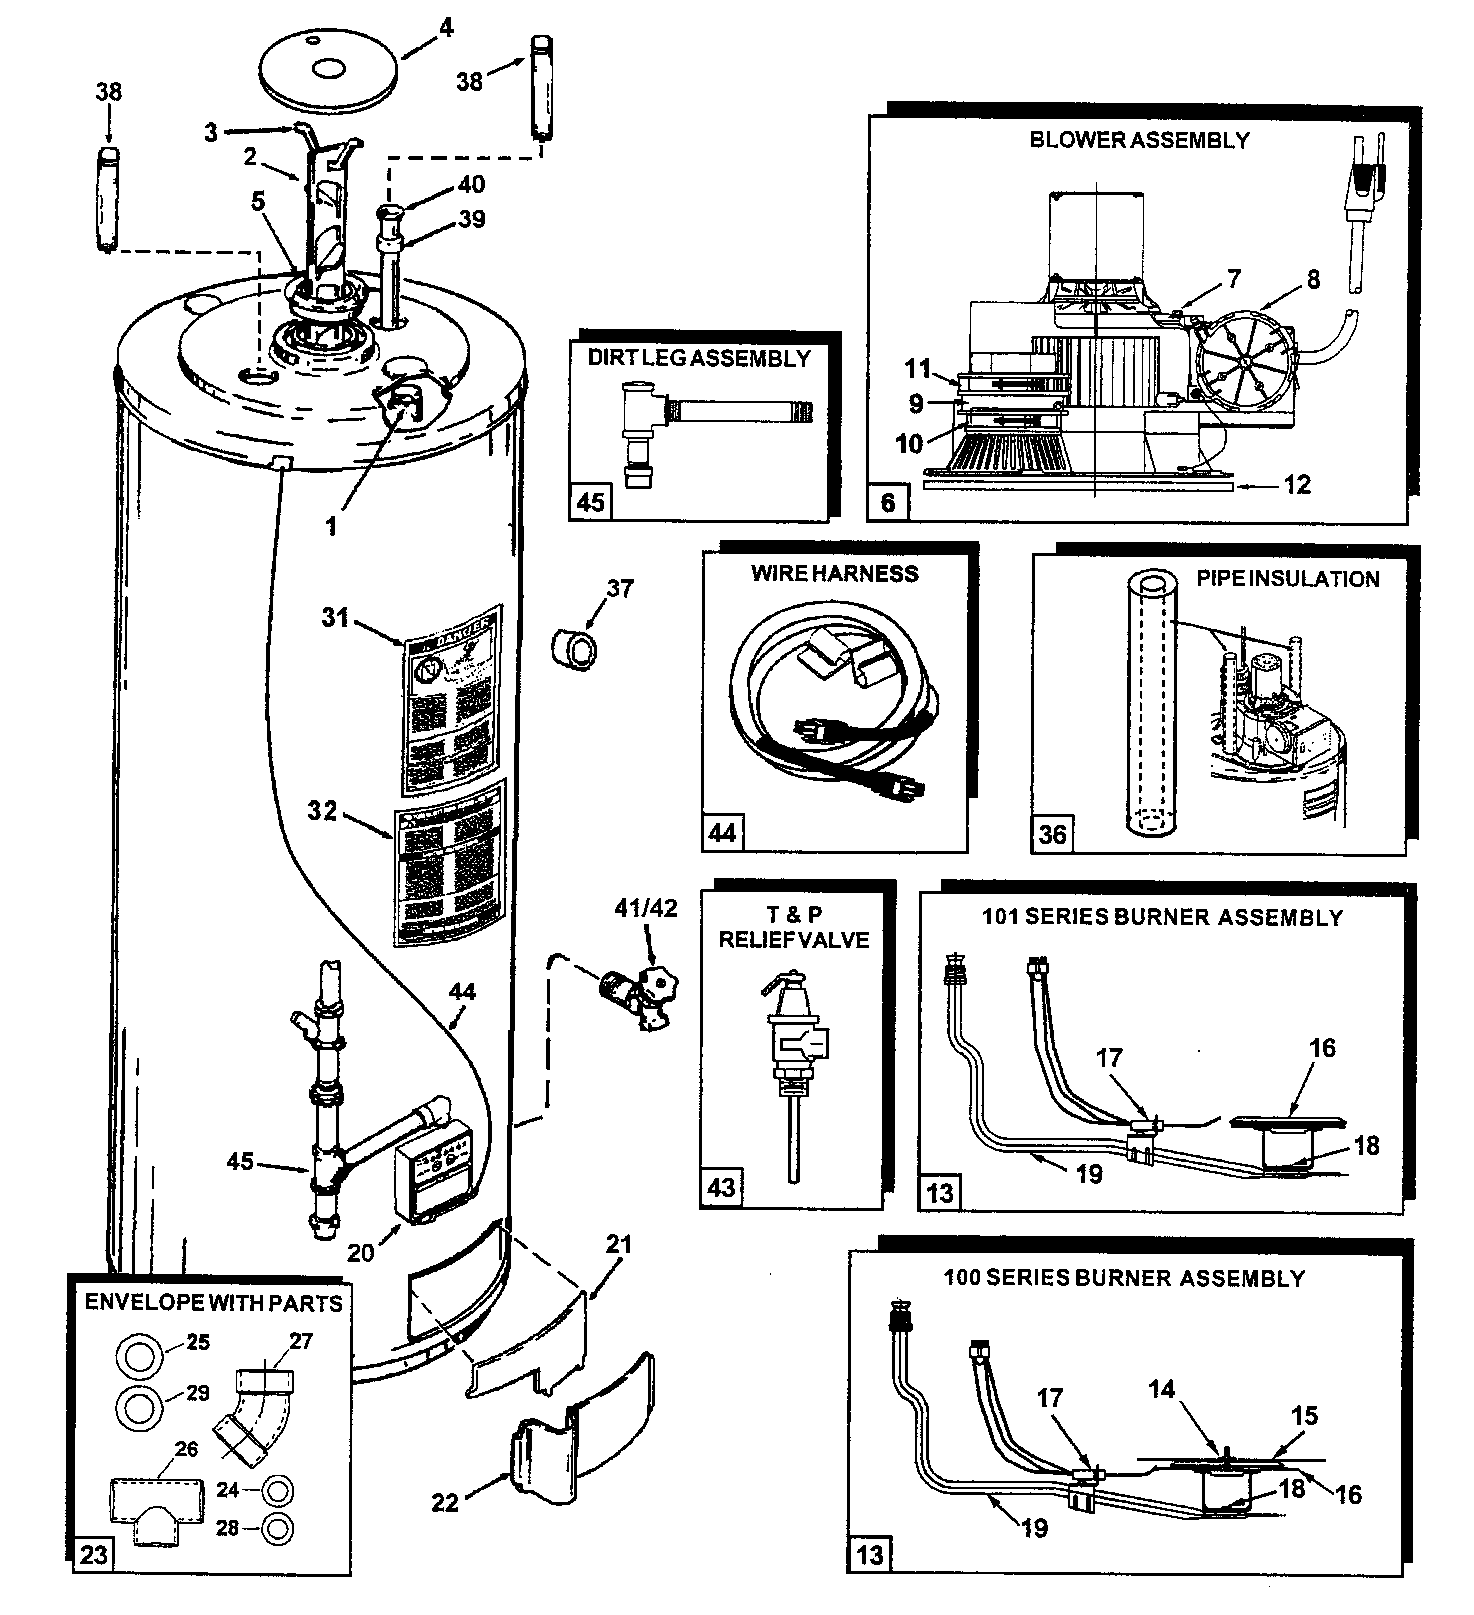 Wiring Diagram For Water Heater from c.searspartsdirect.com